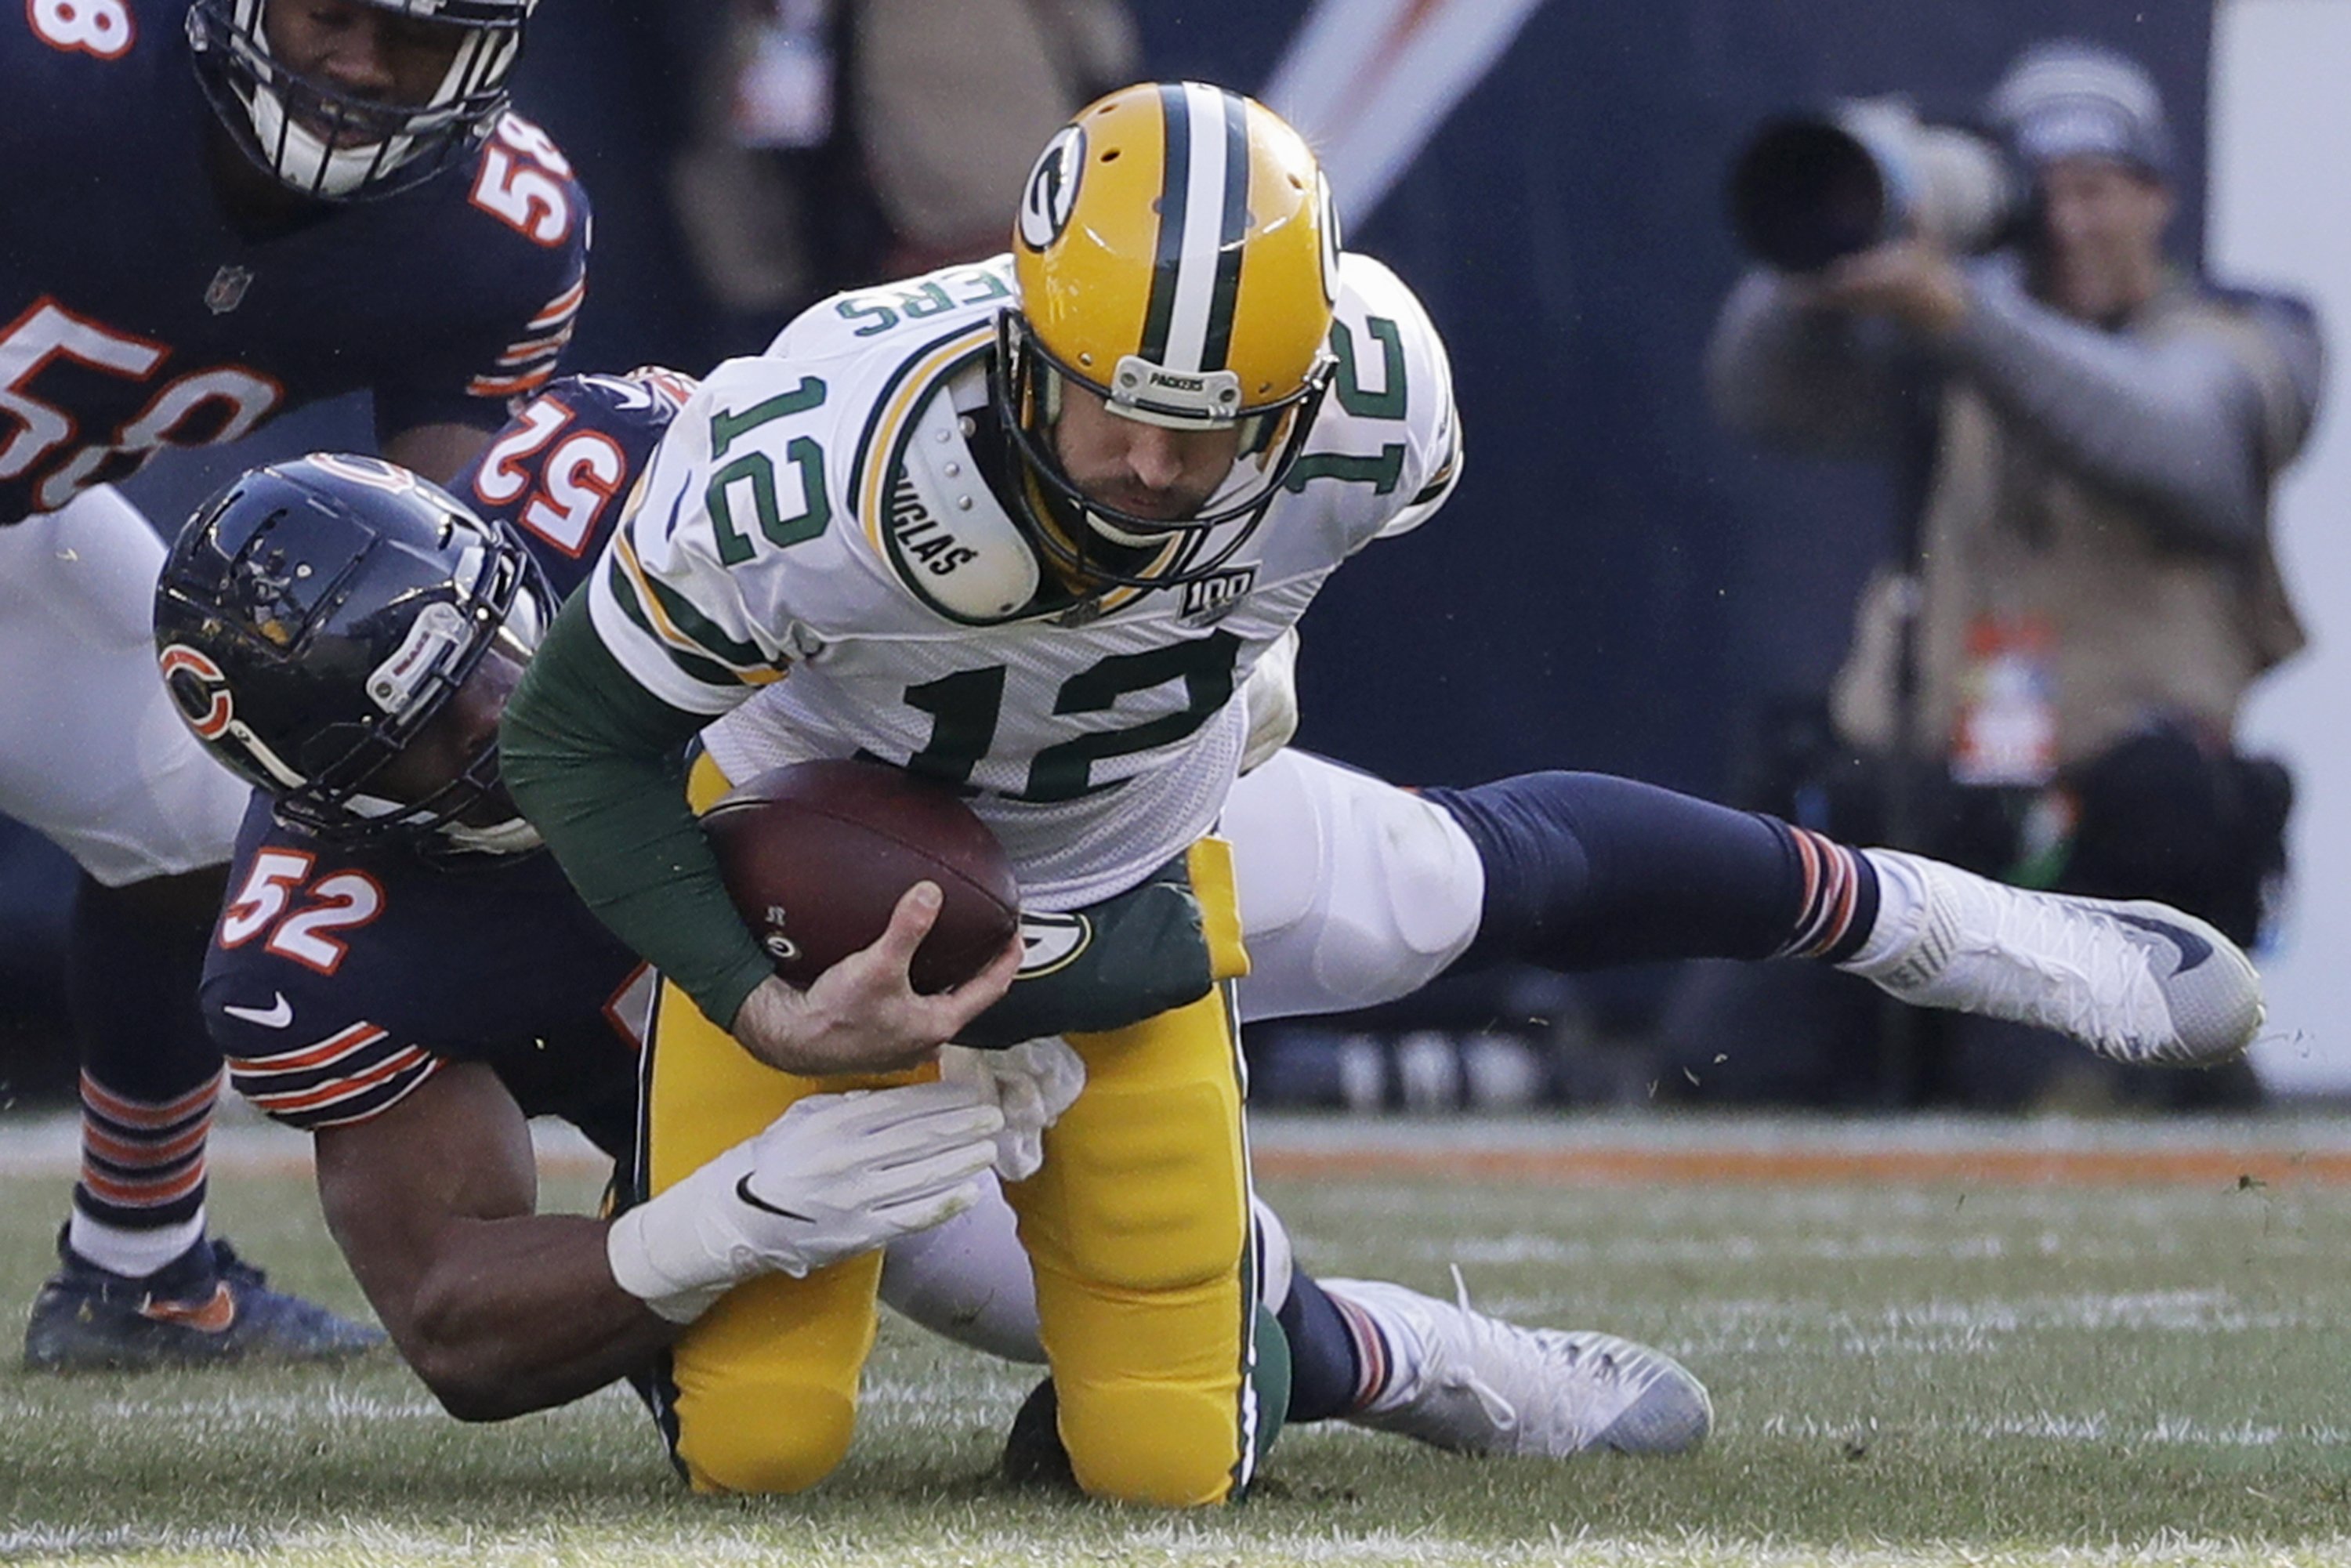 Bears clinch NFC North, eliminate Packers from playoff contention